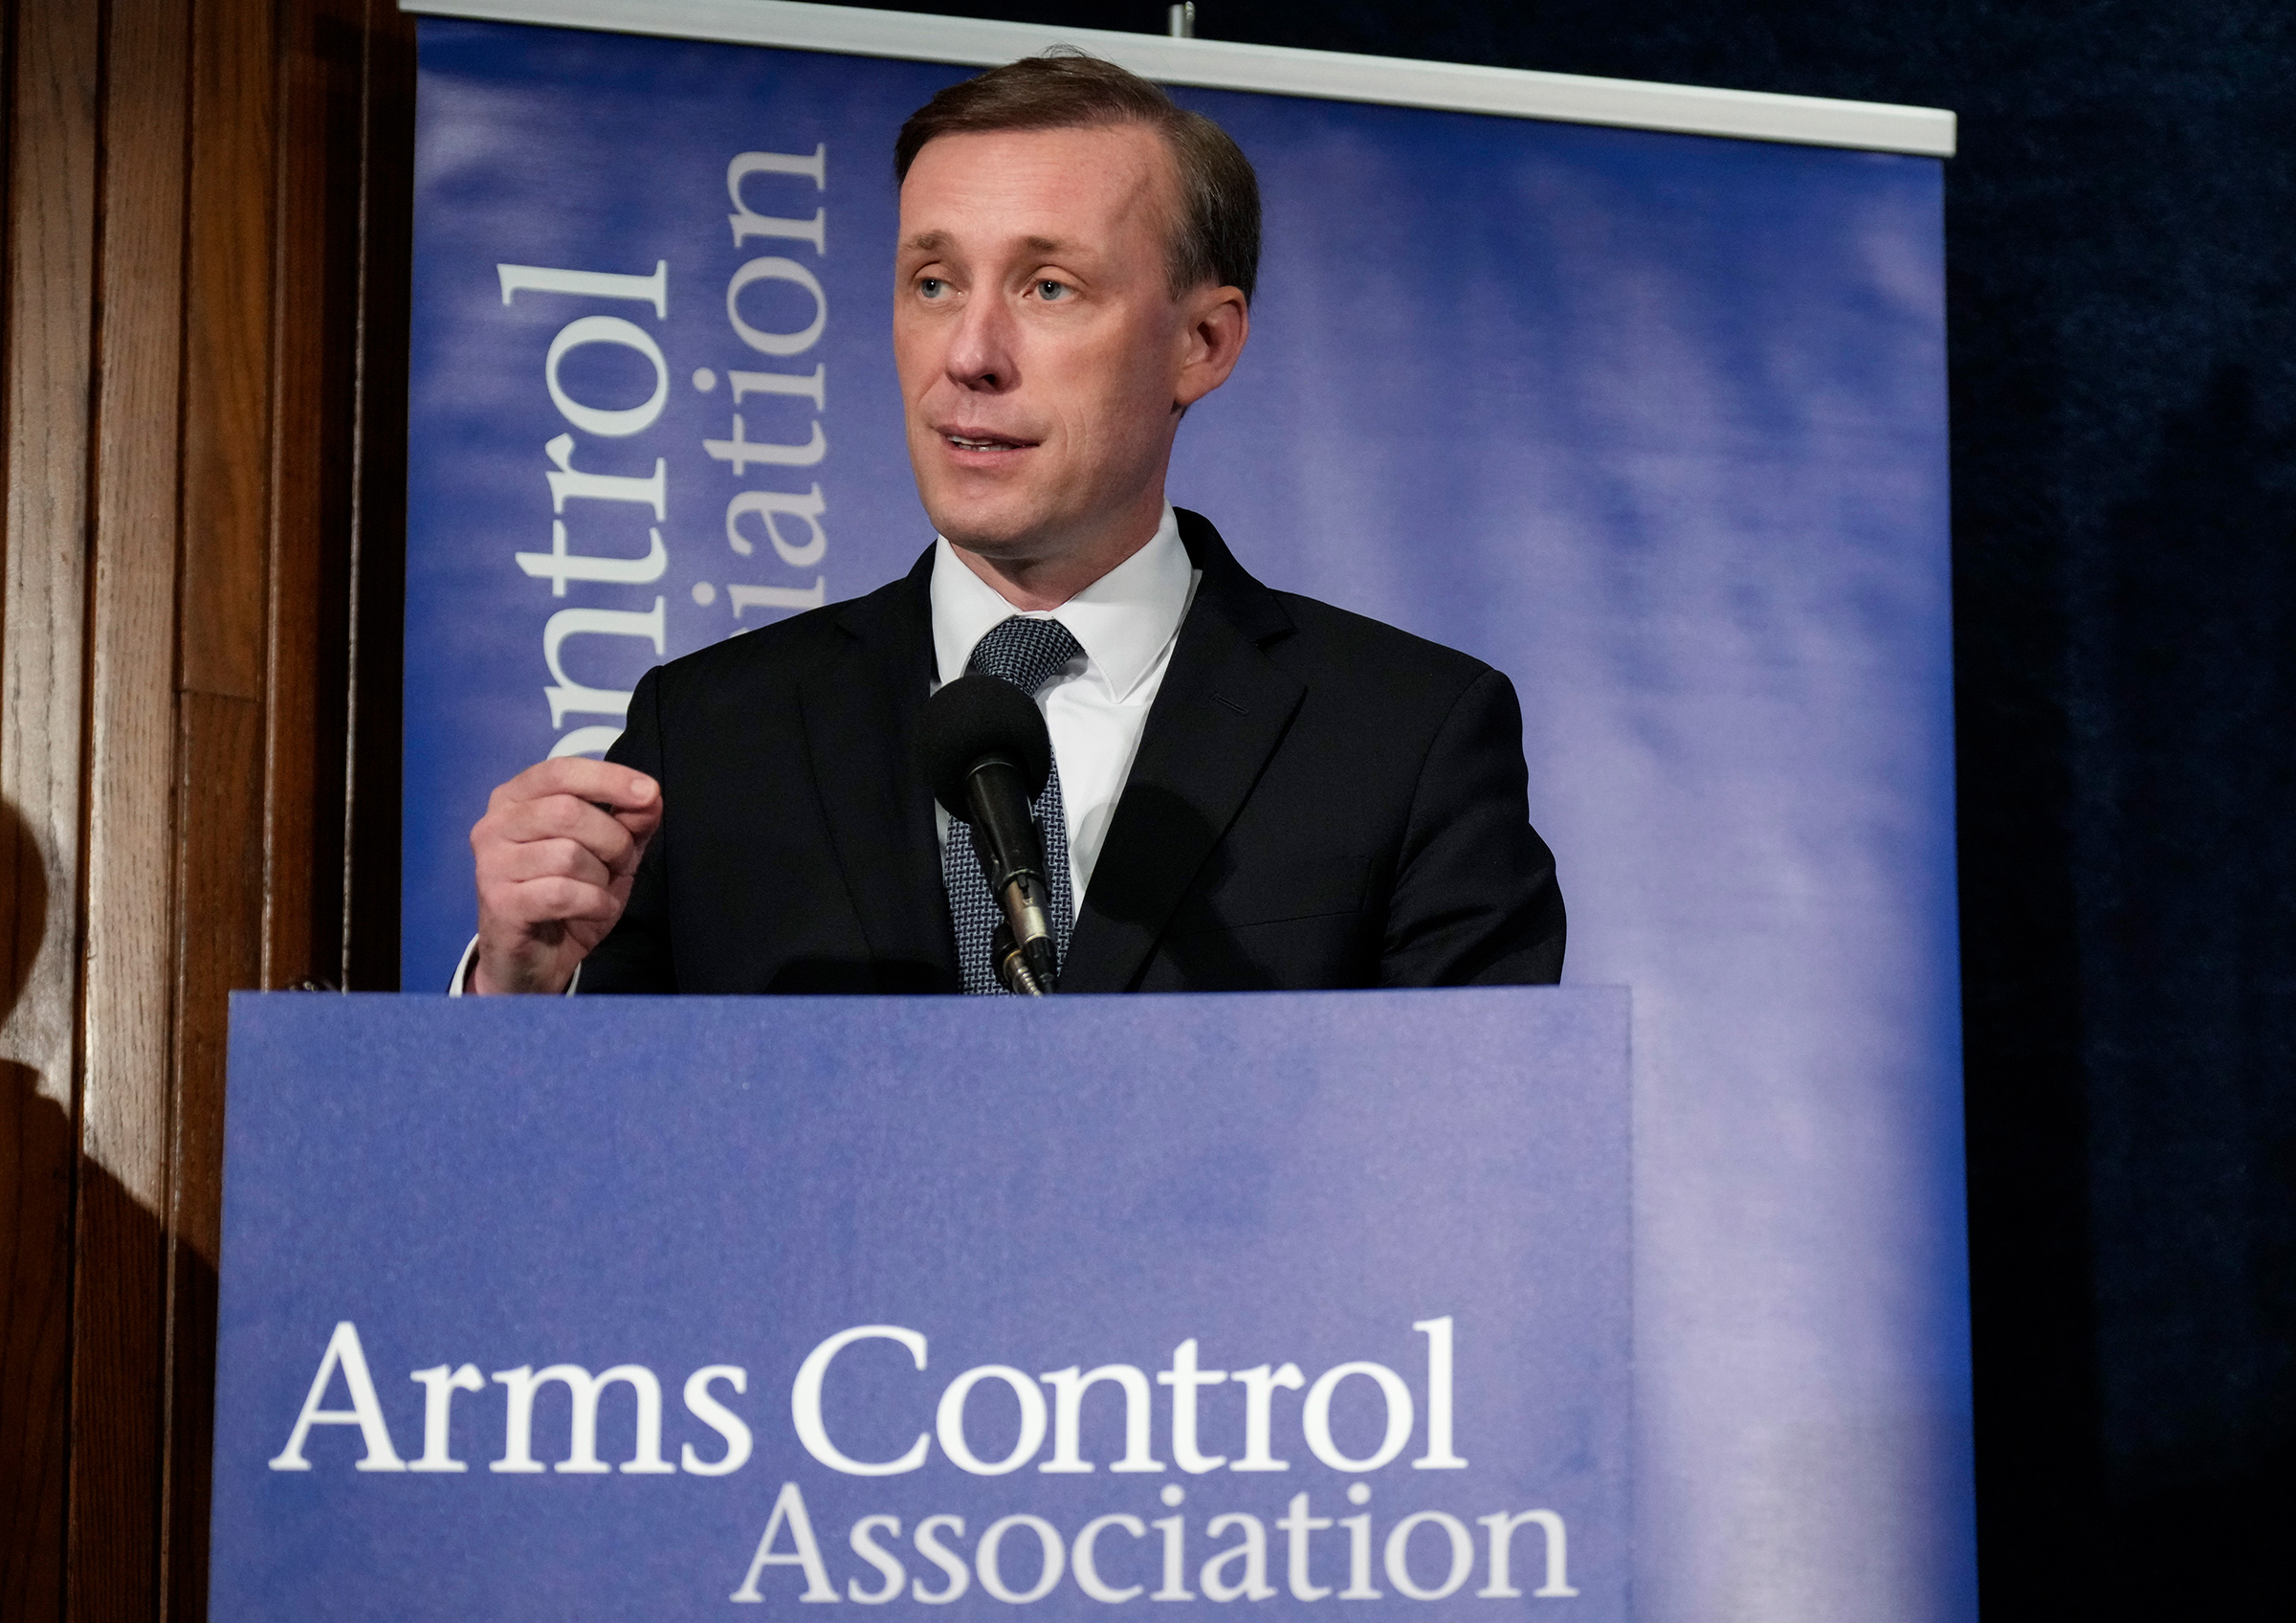 White House National Security Advisor Jake Sullivan speaks during the annual meeting of the Arms Control Association at the National Press Club on June 2 in Washington. Sullivan spoke on a range of topics, including the Biden administration's willingness to engage with Russia on nuclear arms control after Russian President Vladimir Putin's decision to suspend the last nuclear arms control treaty between the two countries. (Drew Angerer—Getty Images)